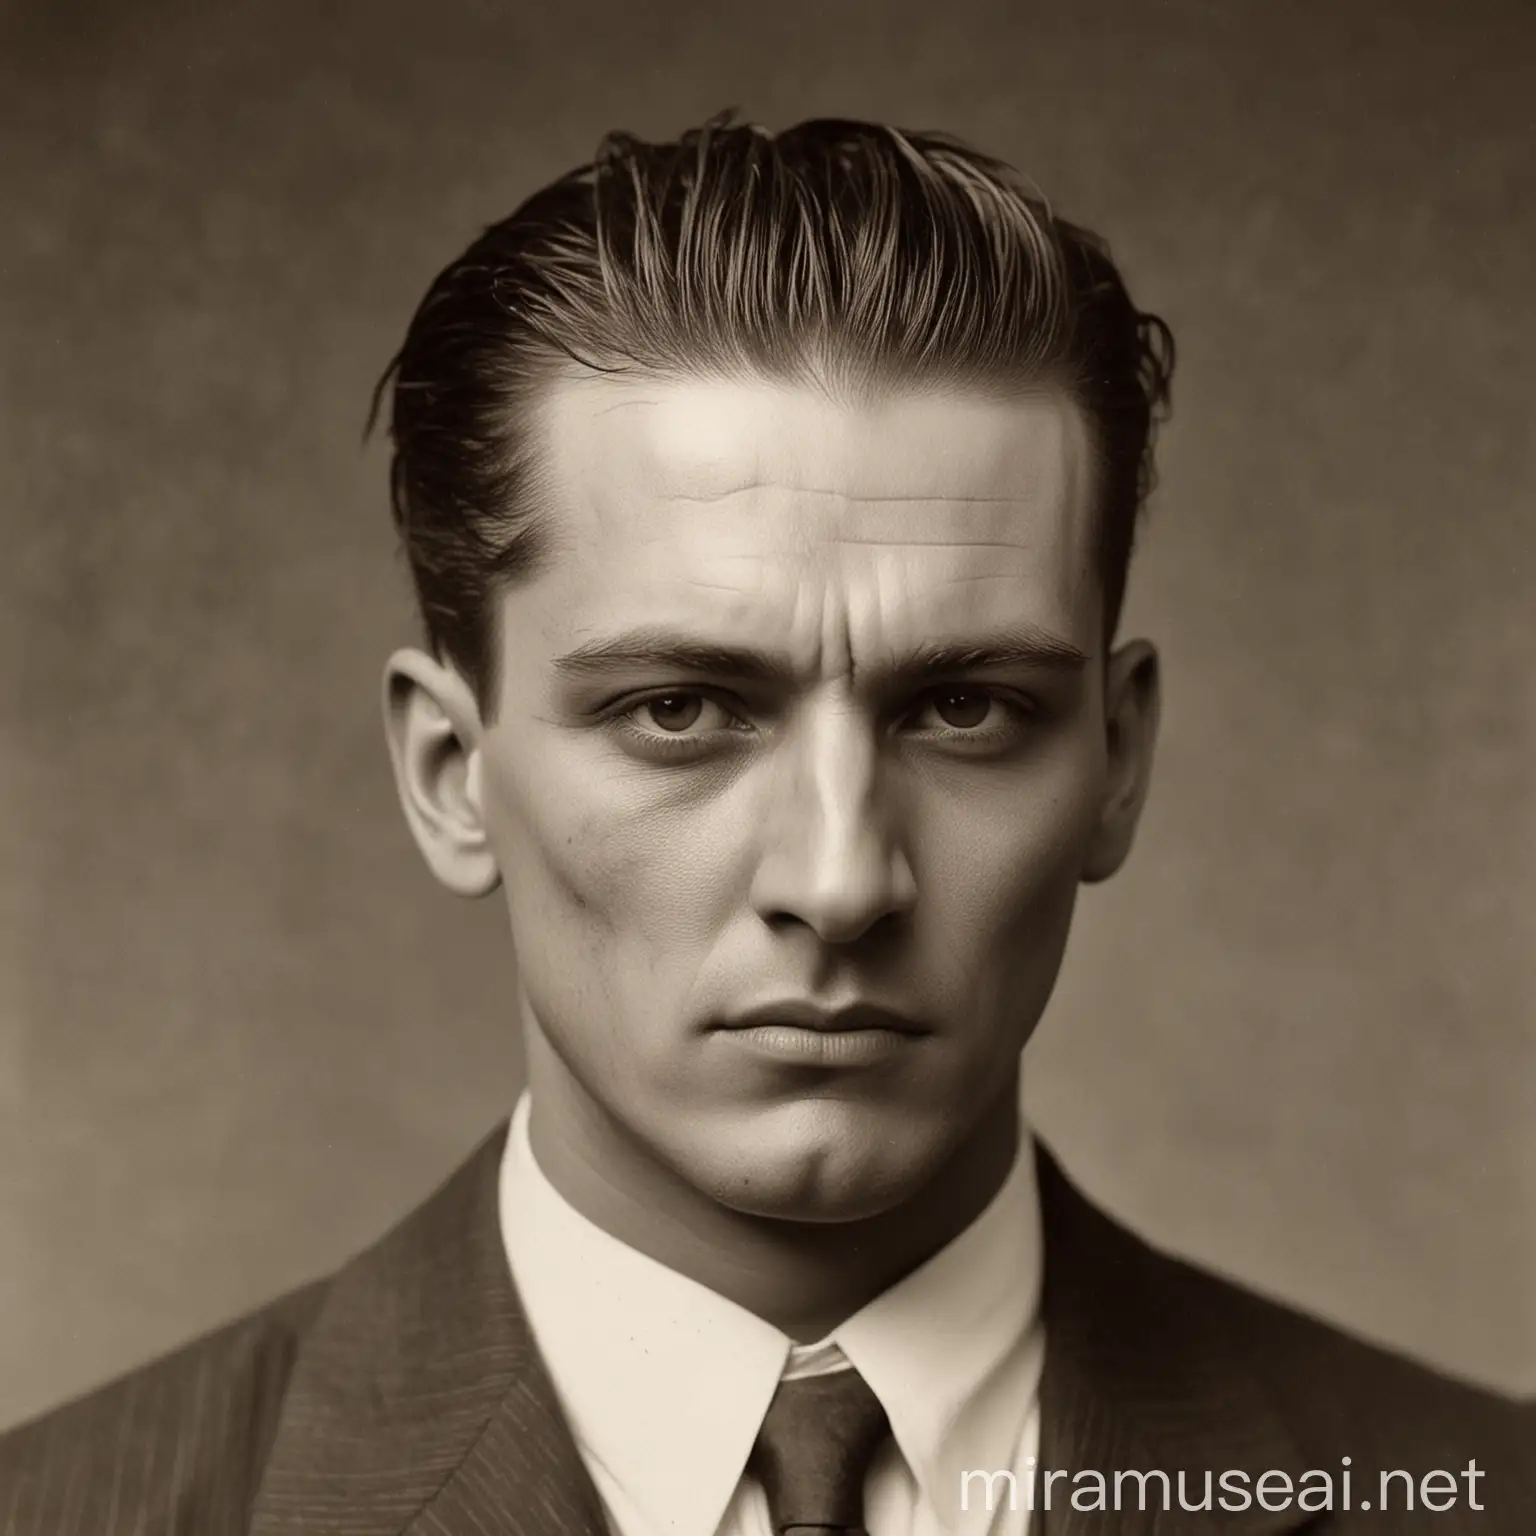 1920, man, scar on his face, hair slicked back